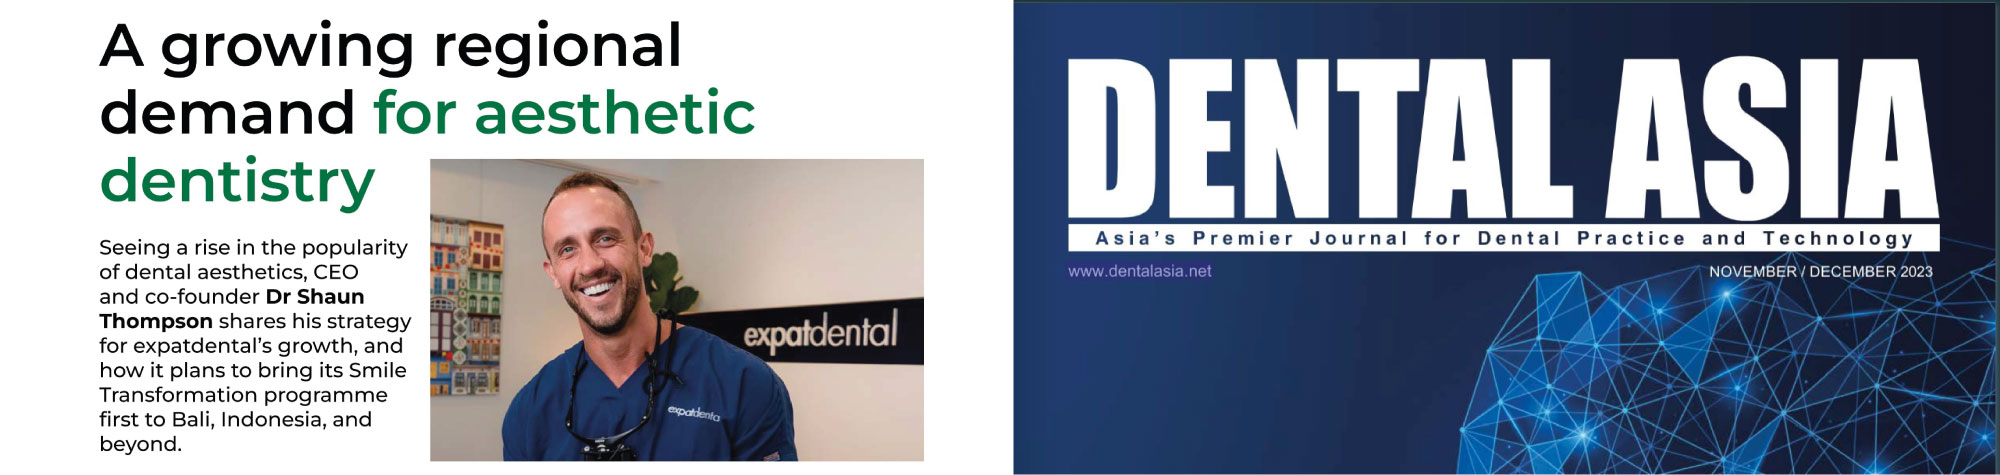 A growing regional demand for aesthetic dentistry